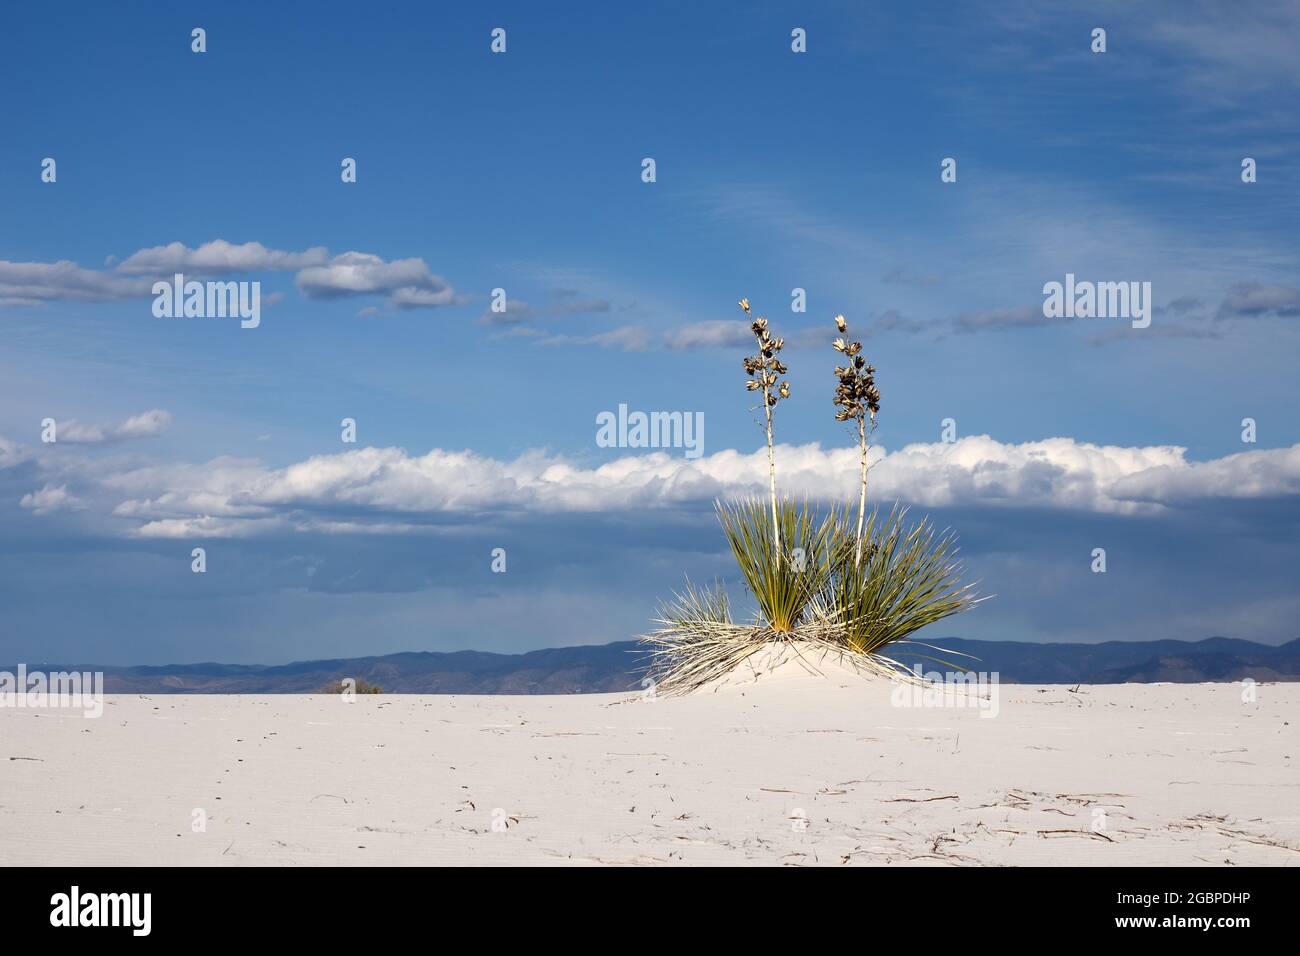 geography / travel, USA, New Mexico, Alamogordo, Picnic Area Spanish daggers Alamogordo, New Mexico, ADDITIONAL-RIGHTS-CLEARANCE-INFO-NOT-AVAILABLE Stock Photo